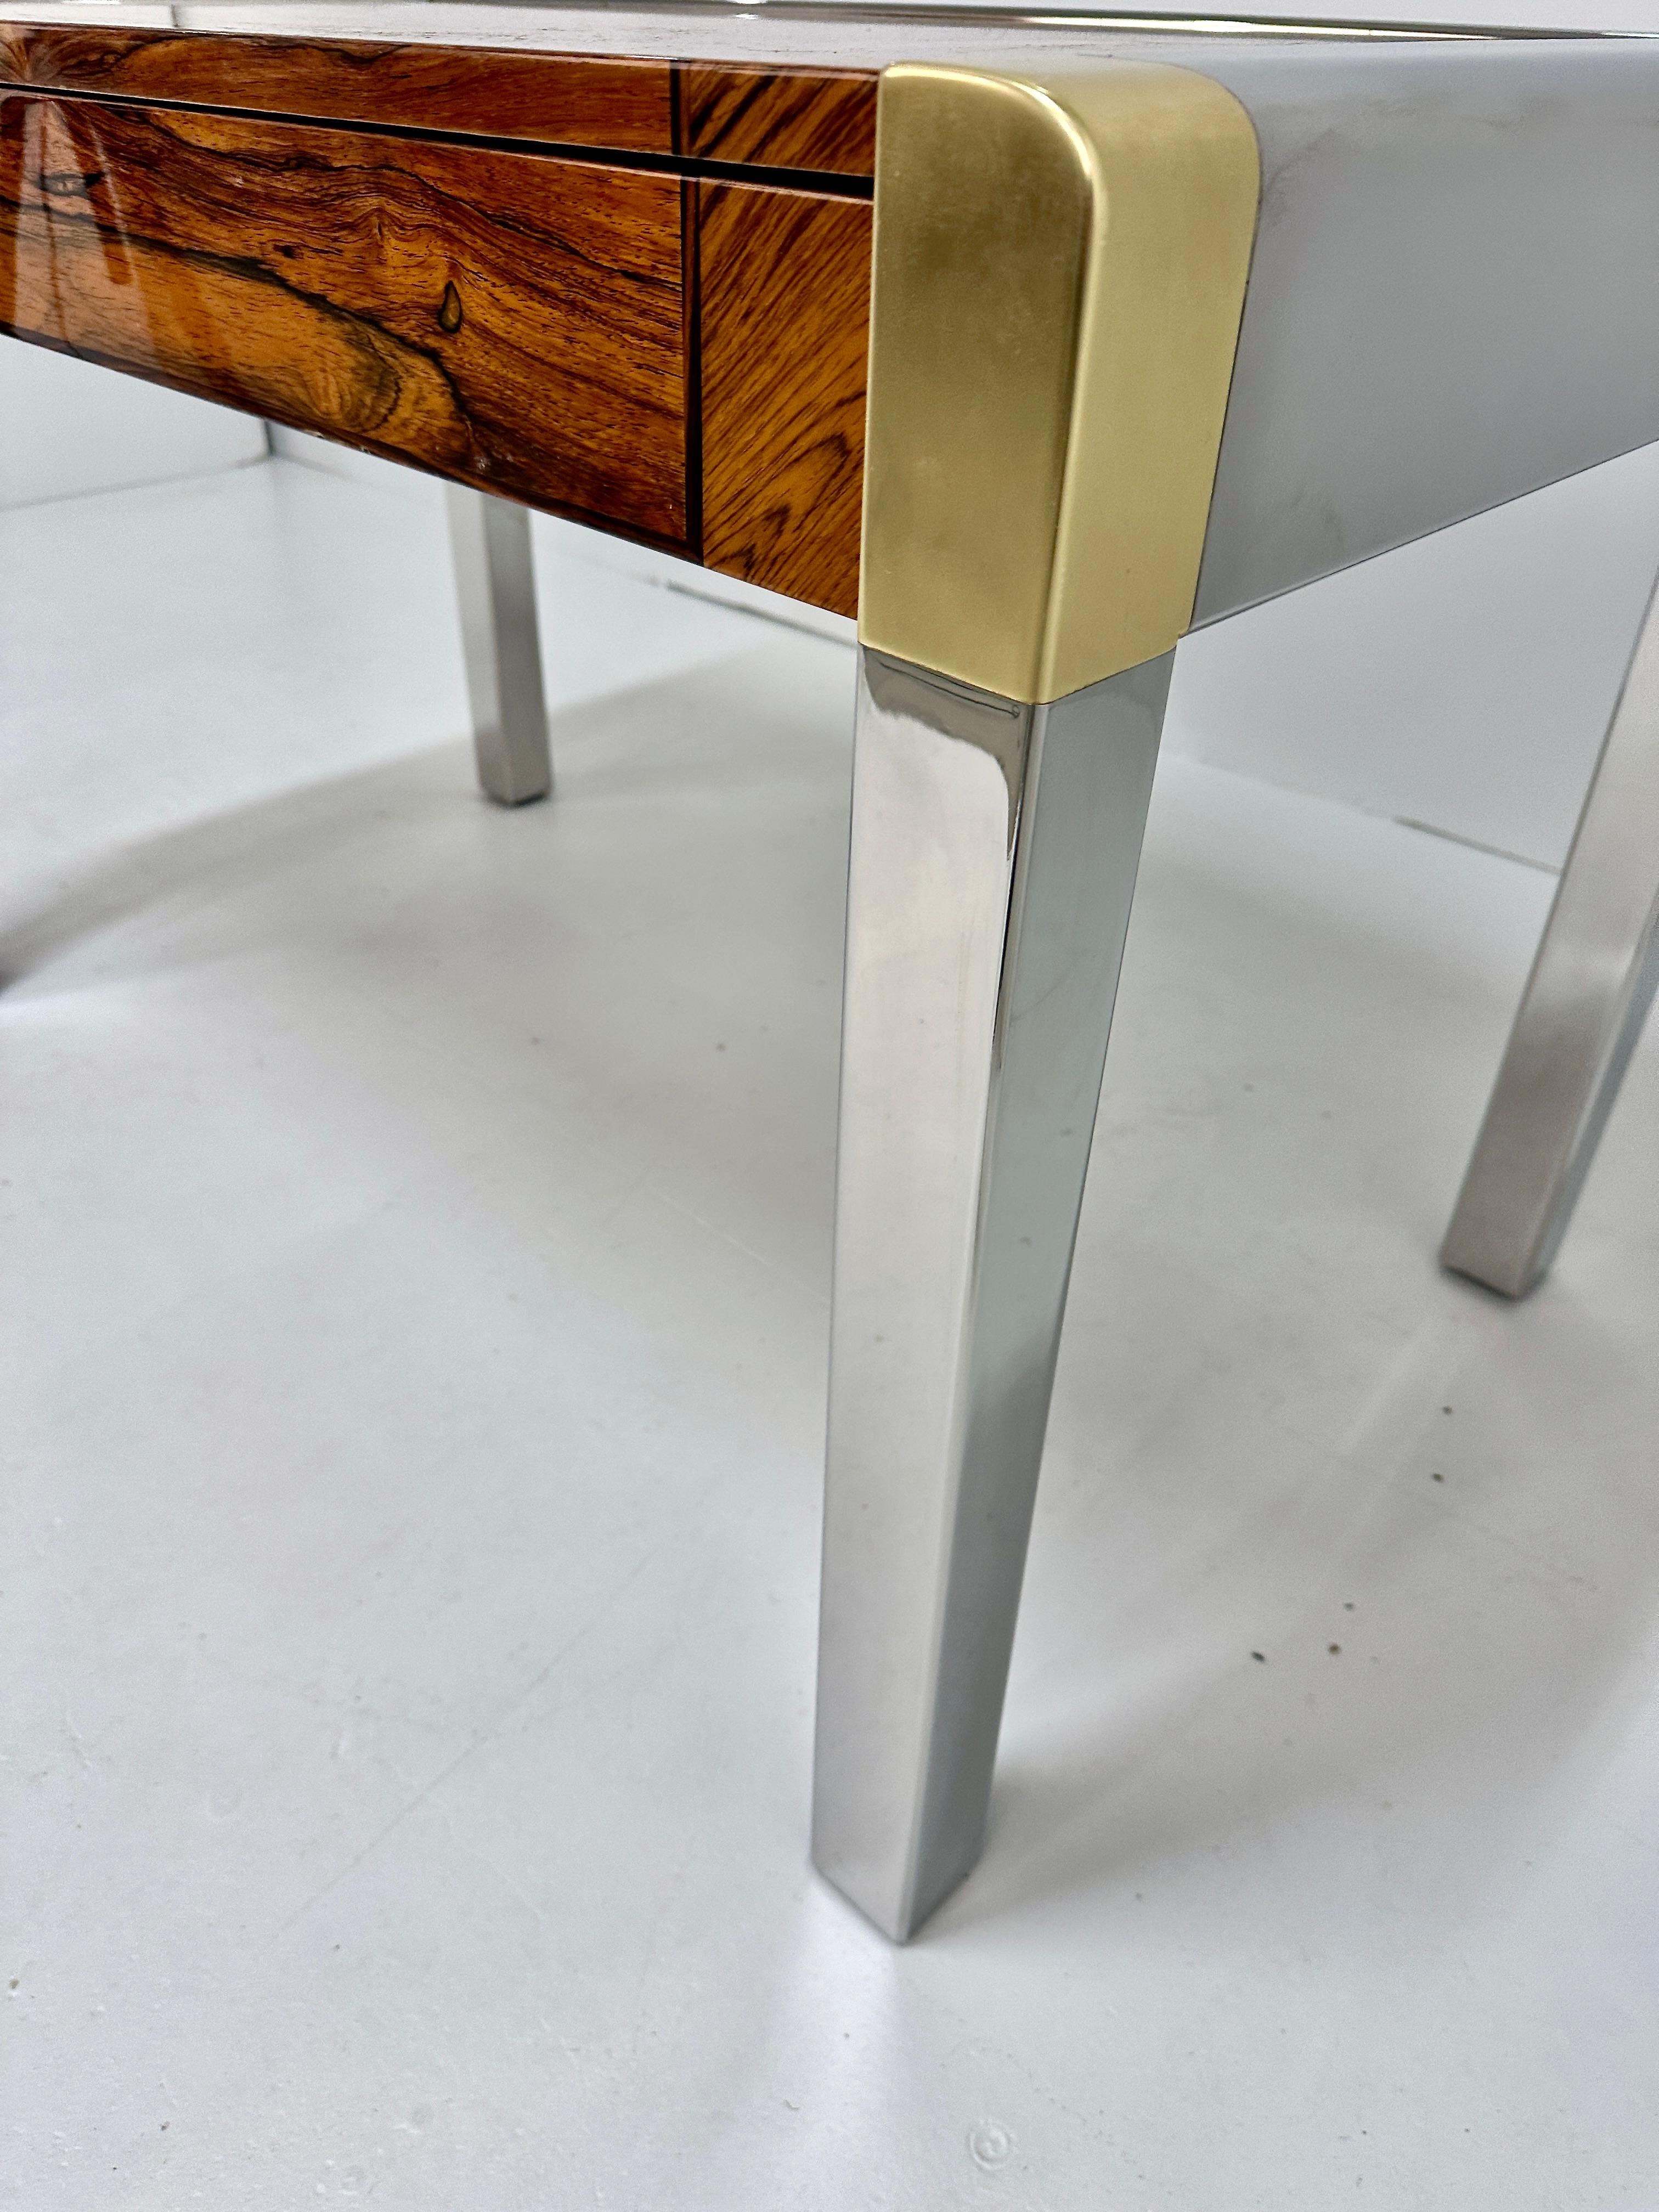 Karl Springer Zebra Wood Writing Table w/ Steel and Brass, USA c 1970s For Sale 5